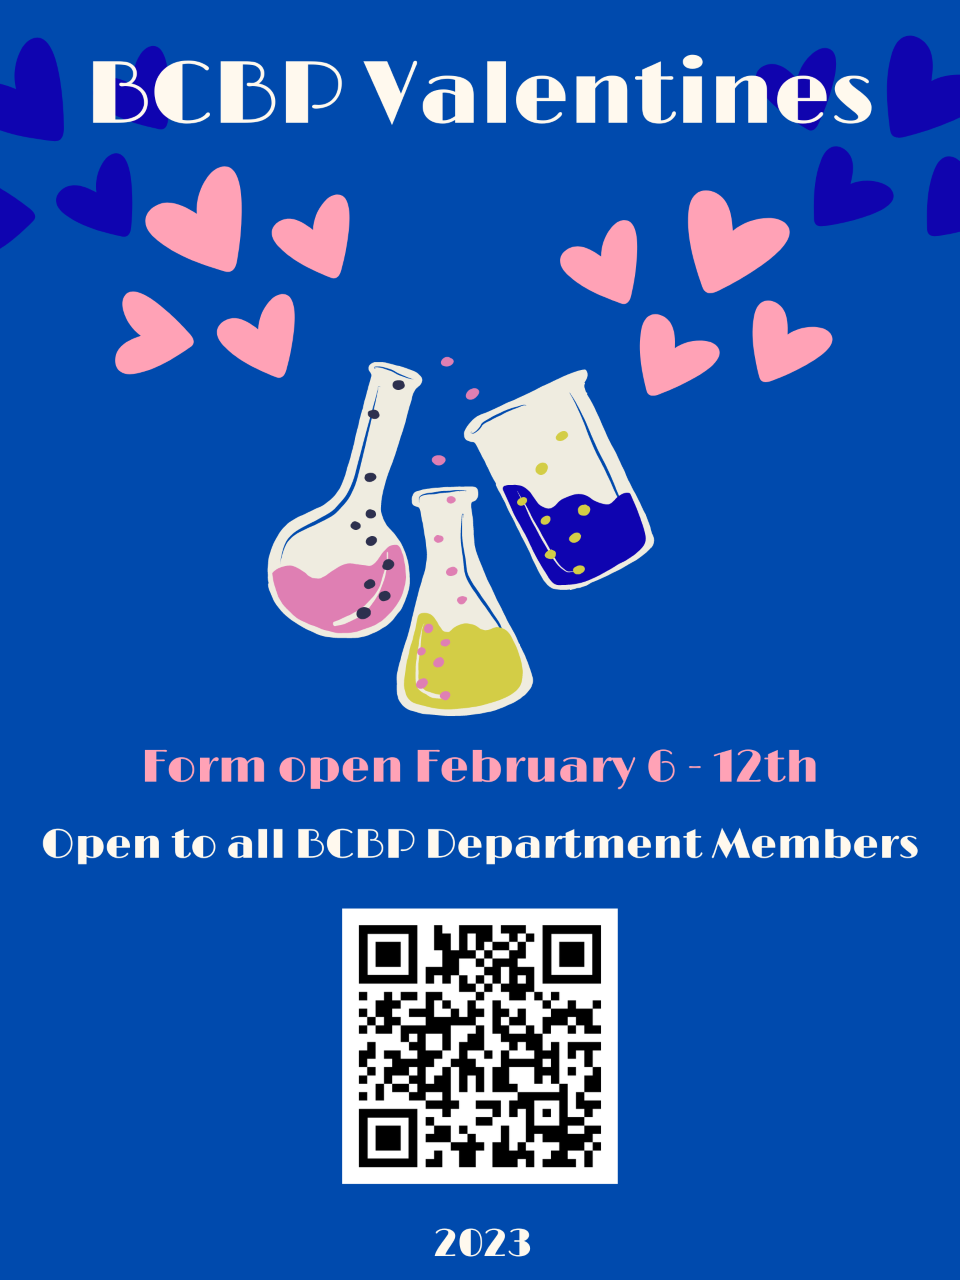 Purple background, test tubes and pink hearts. TExt "BCBP Valentines form open on February 6 open to all members"